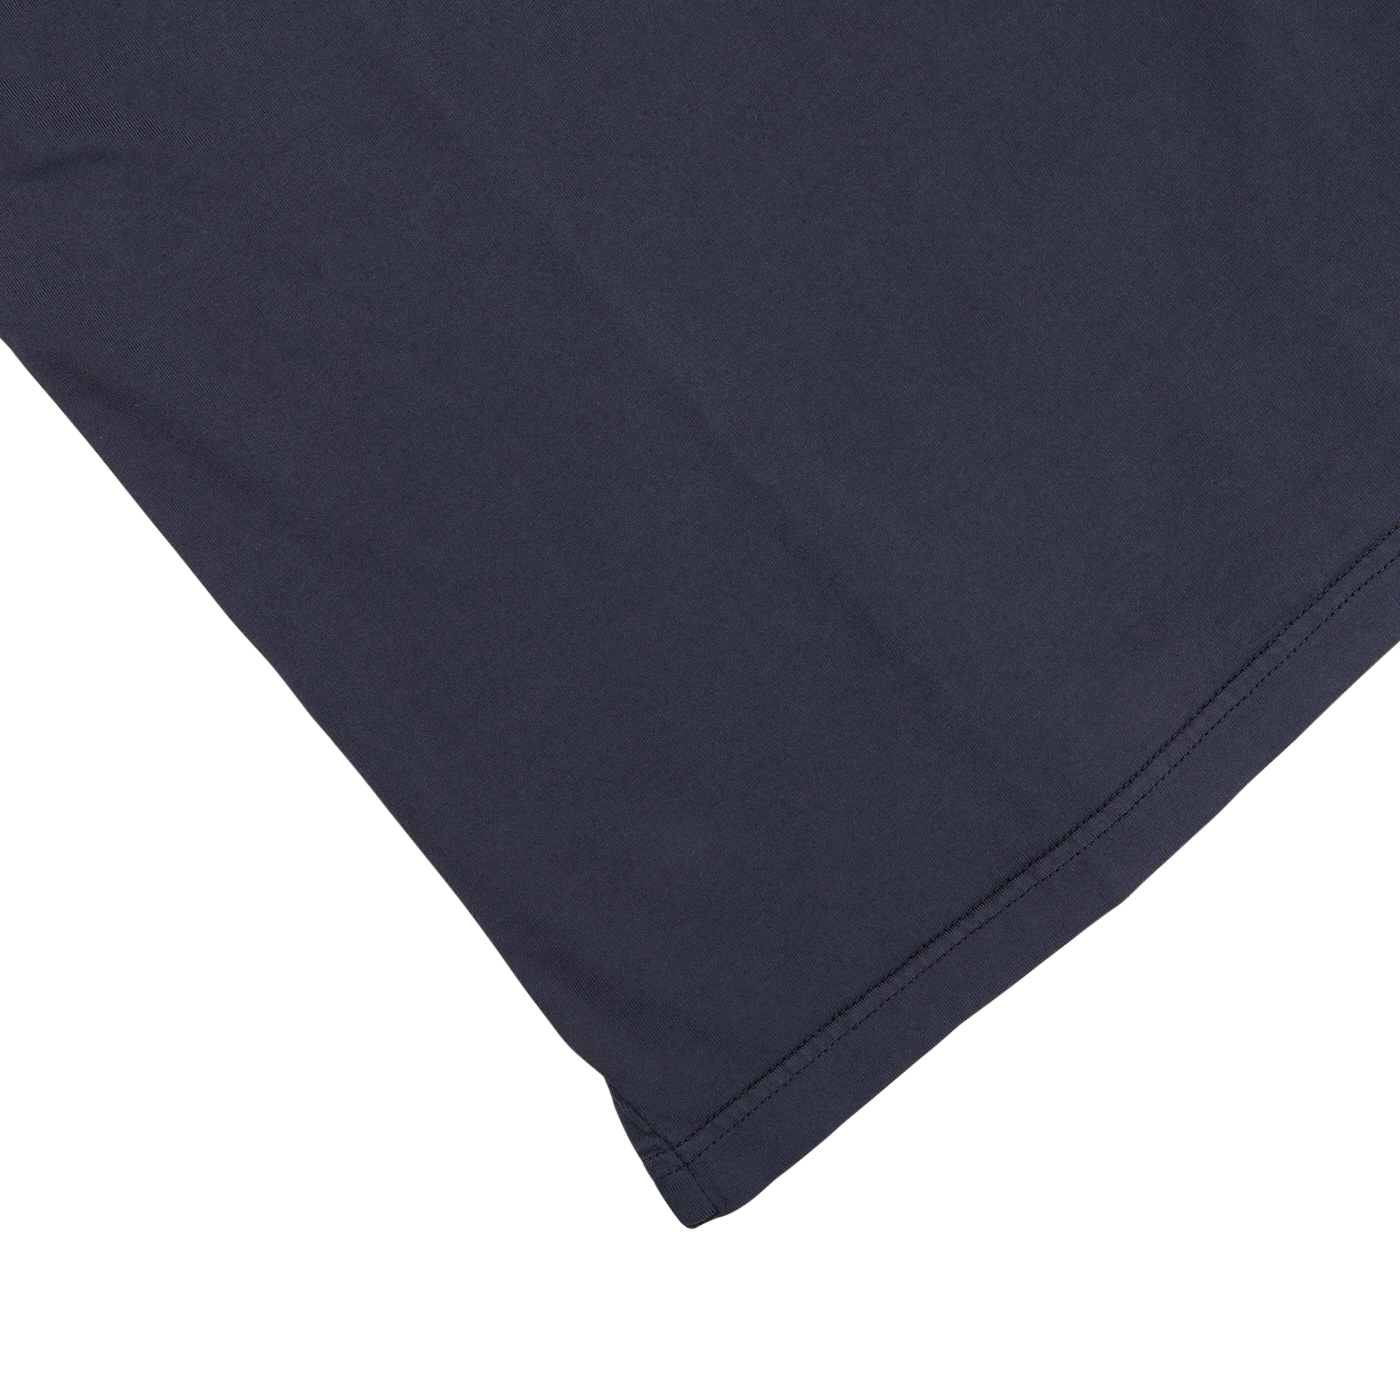 A close up of a navy blue organic cotton polo shirt by Fedeli.